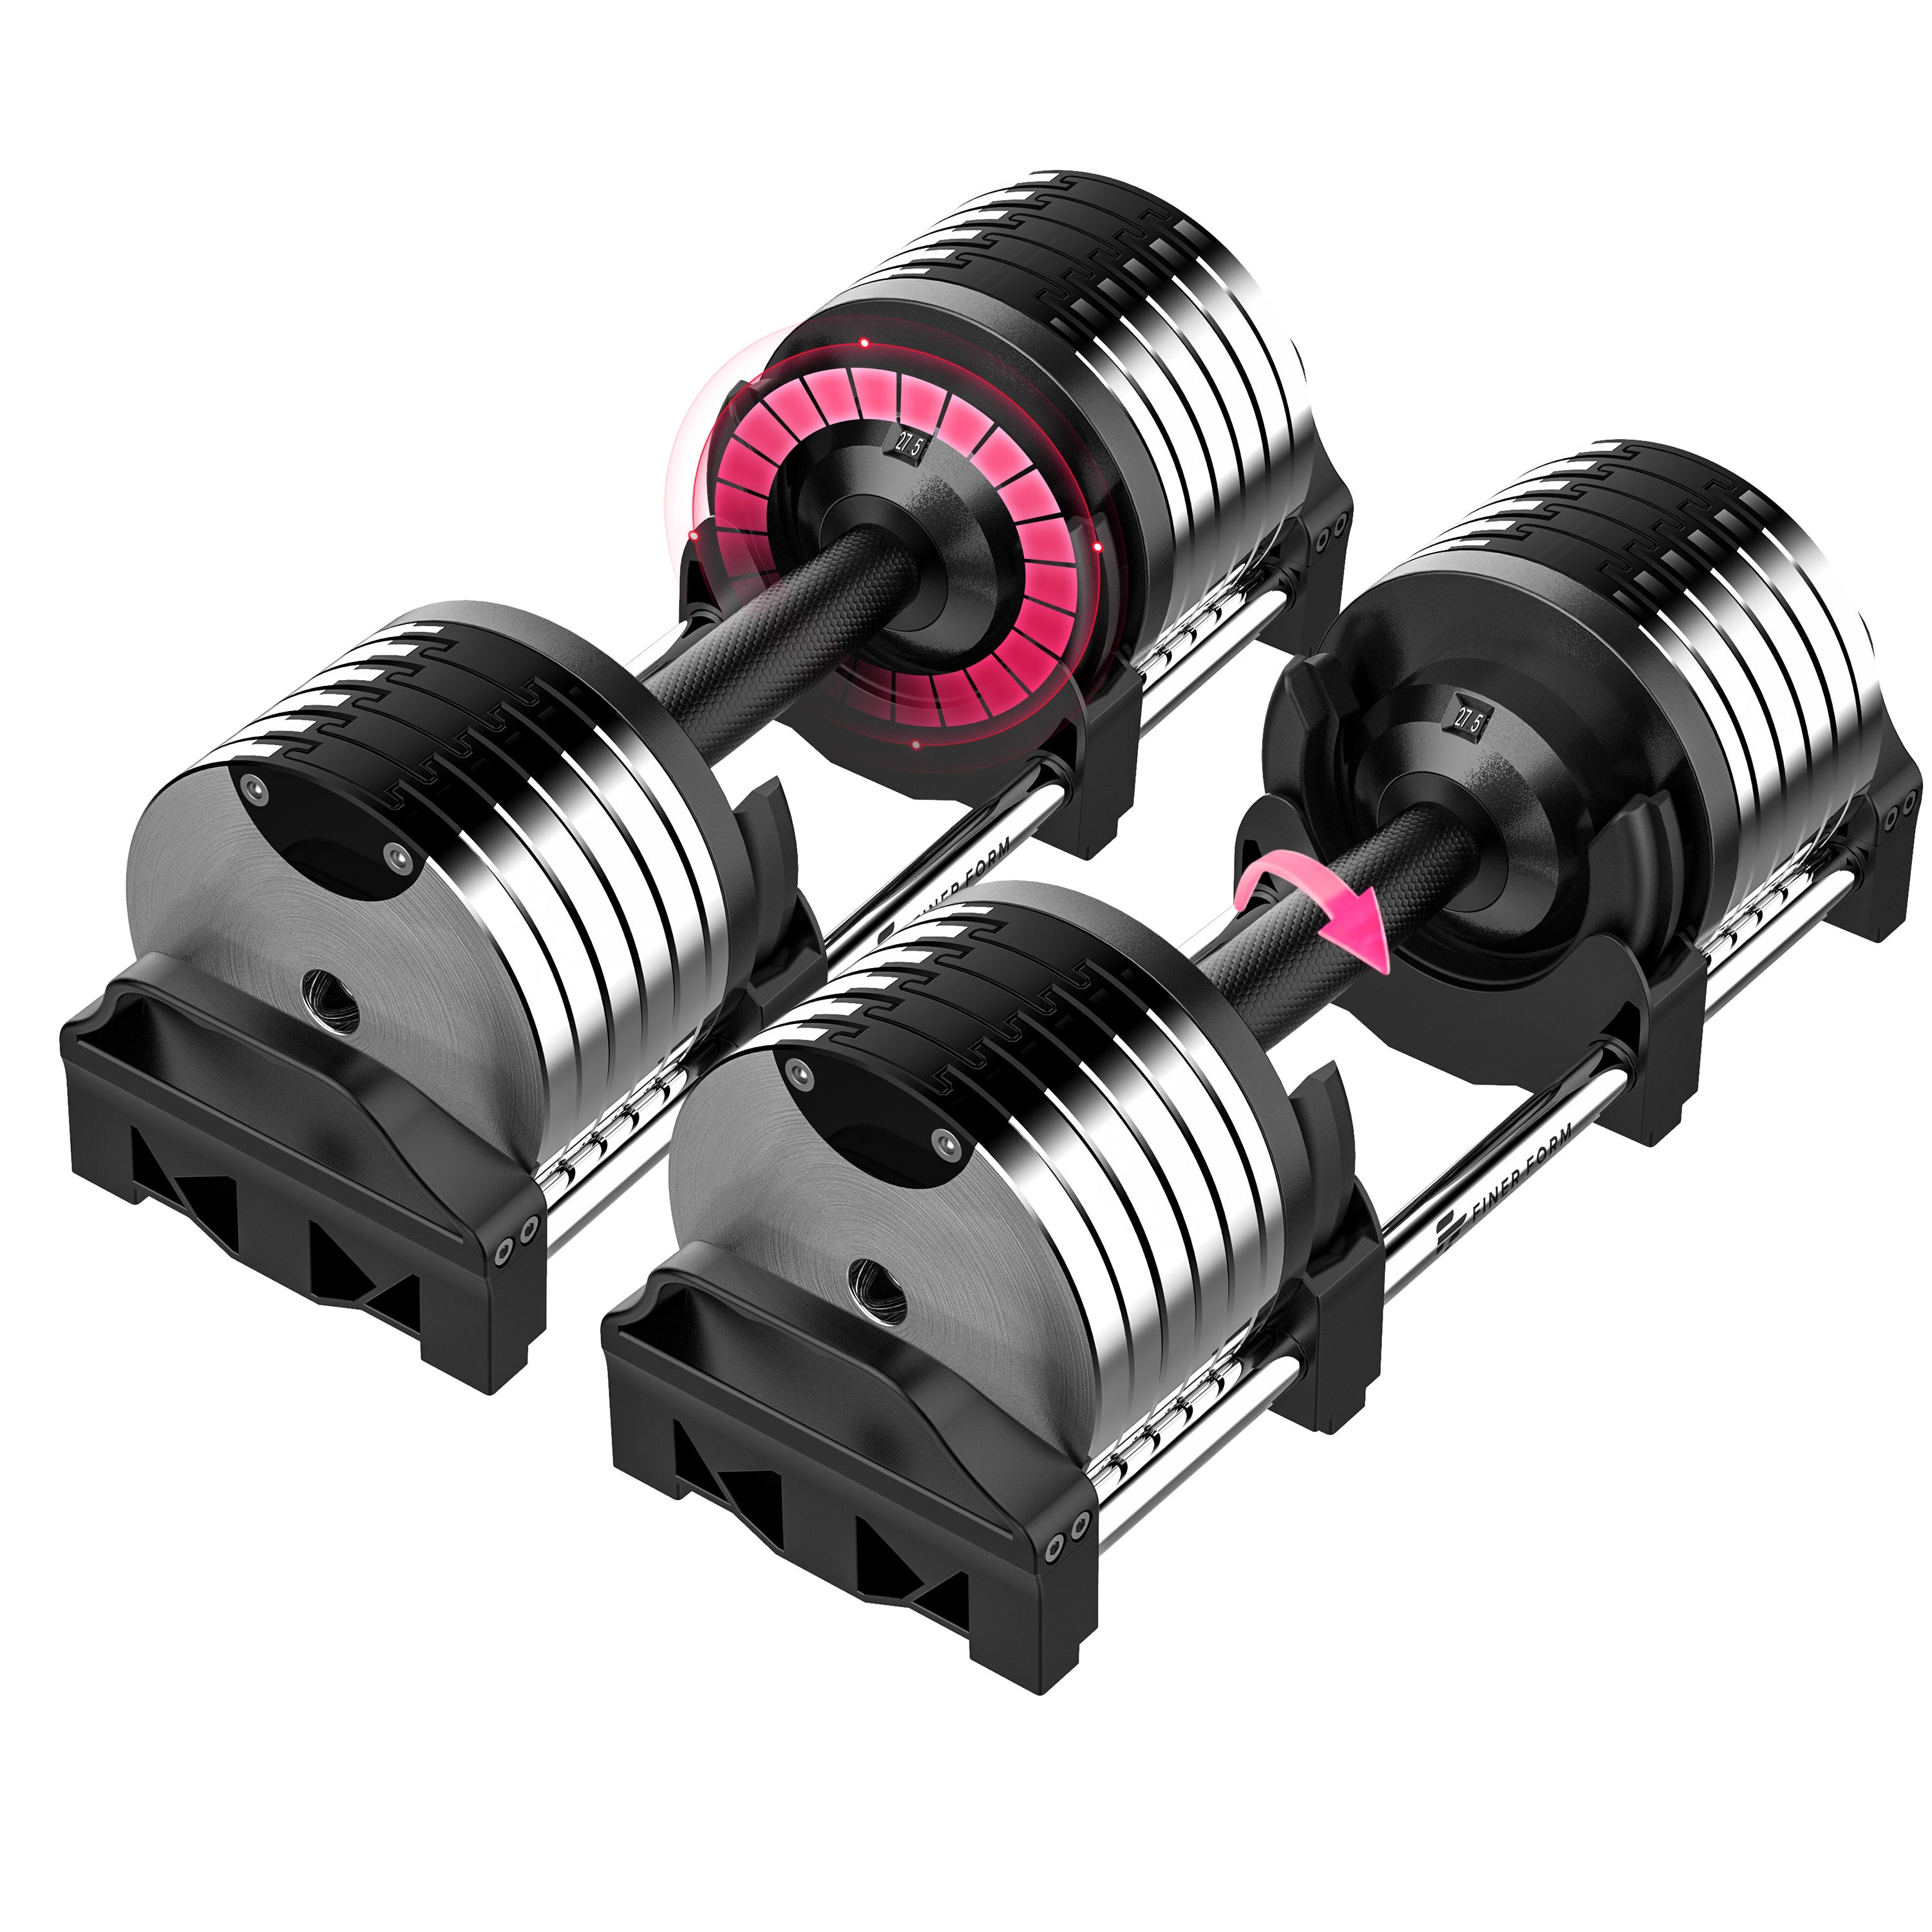 Finer Form Adjustable Dumbbells 5-32.5 LBs, Sold as A Pair